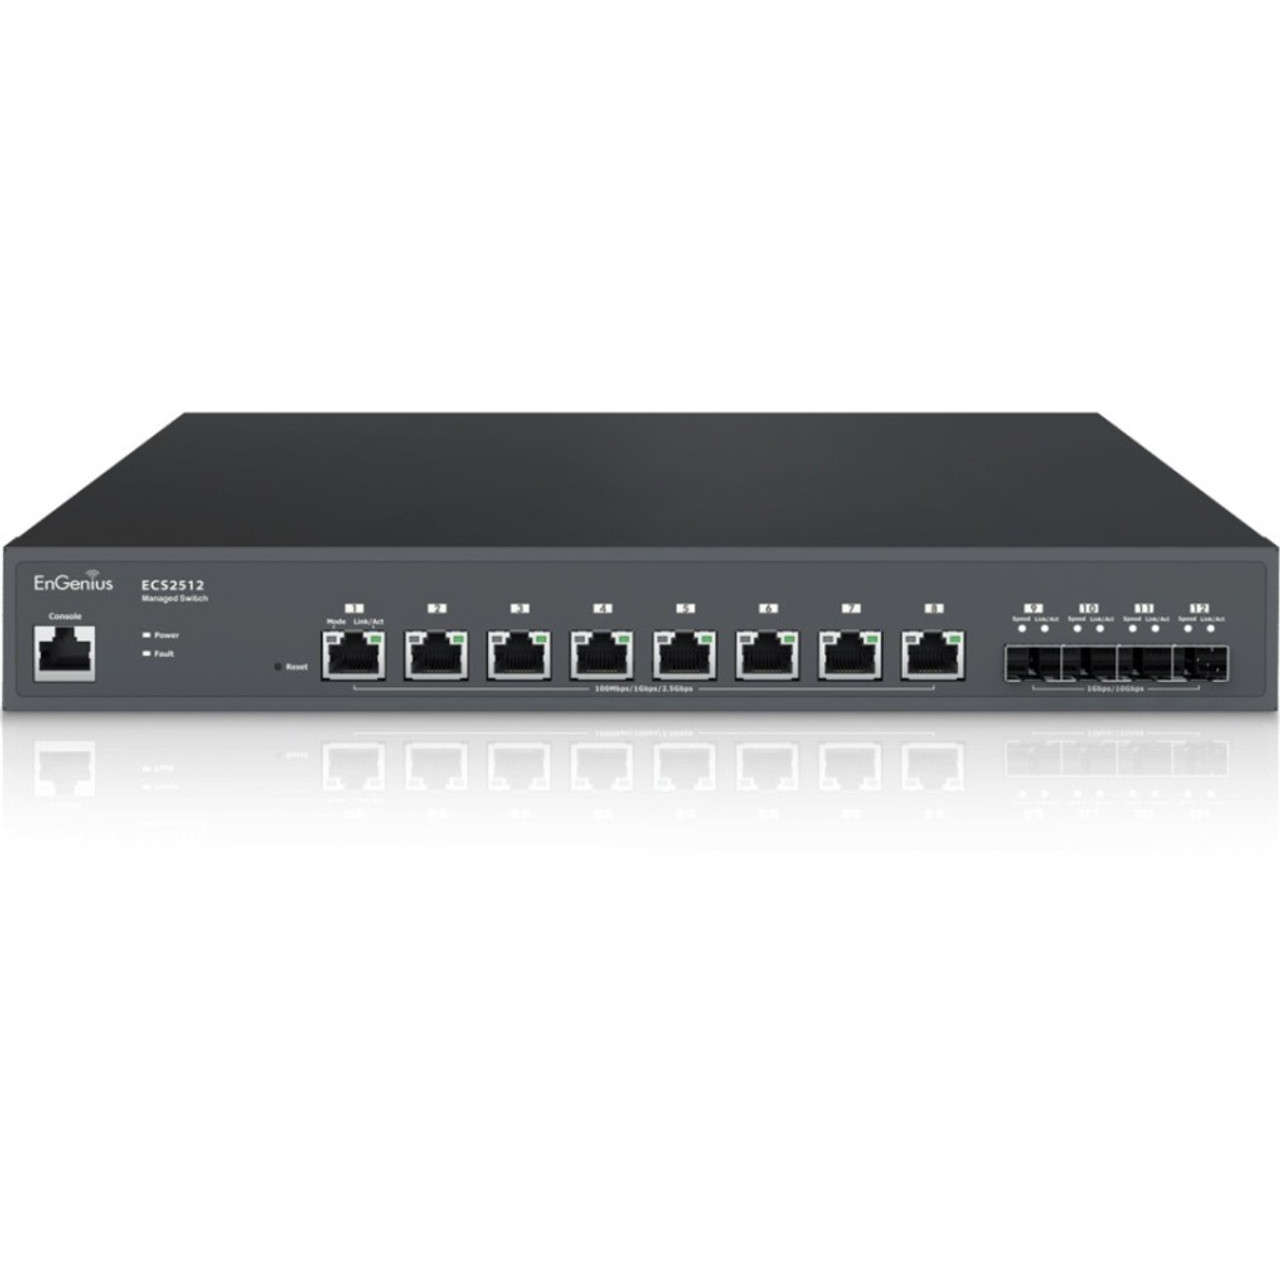 EnGenius Cloud-Enabled 8-Port Network Switch - 8 Ports